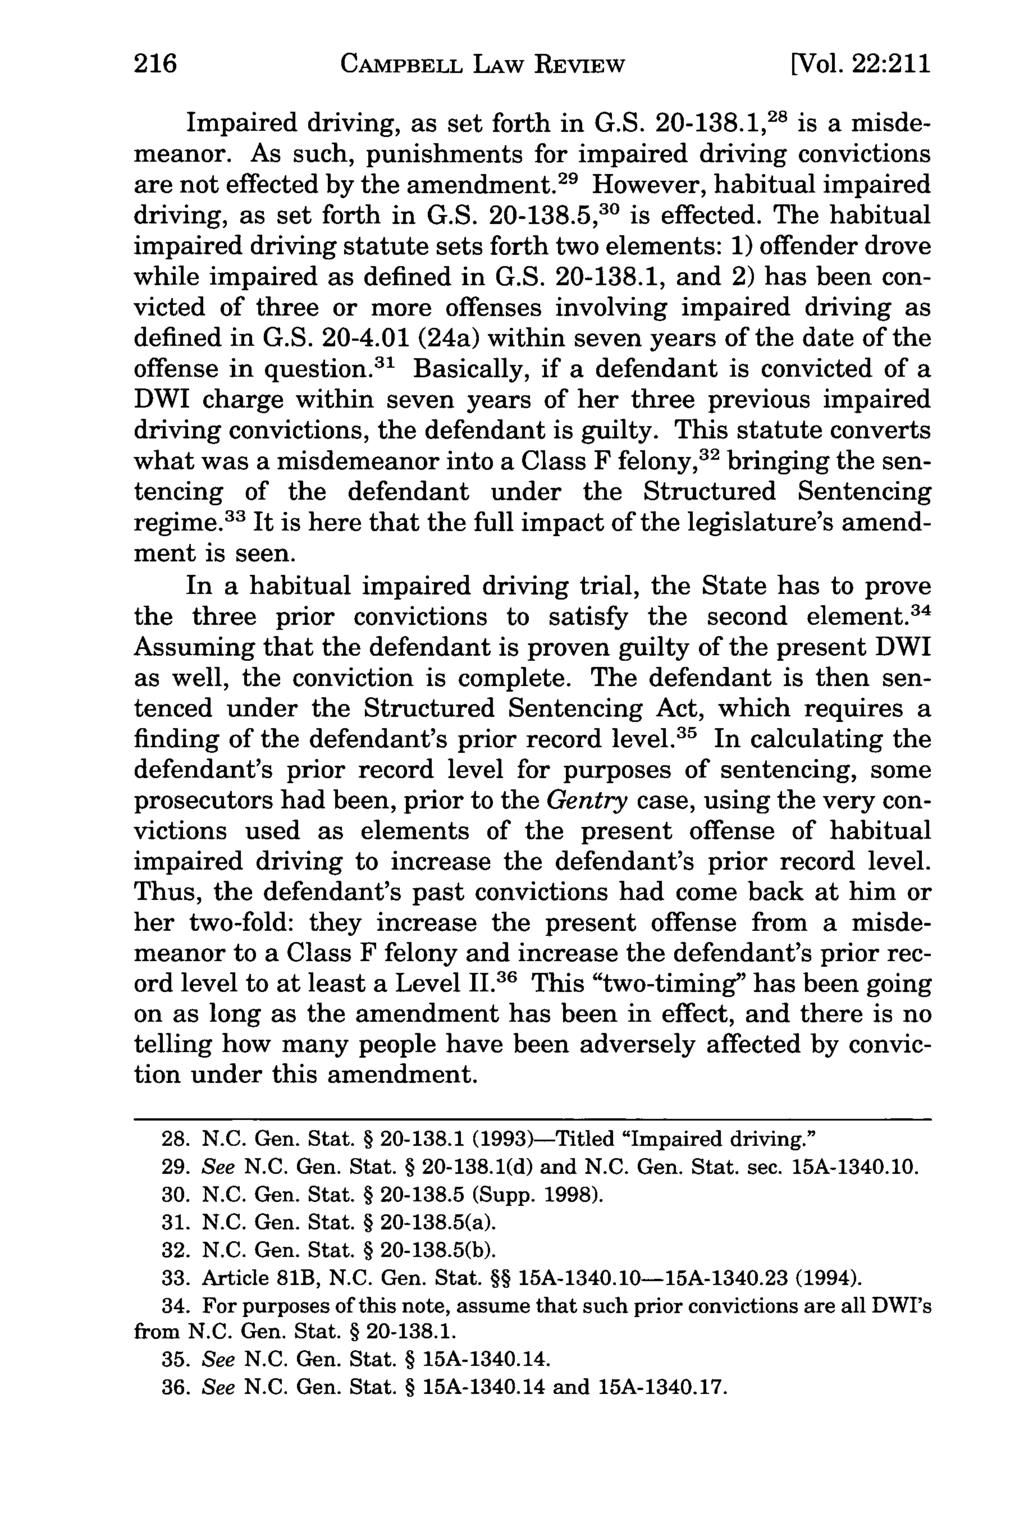 216 Campbell CAMPBELL Law Review, LAW Vol. 22, REVIEW Iss. 1 [1999], Art. 7 [Vol. 22:211 Impaired driving, as set forth in G.S. 20-138.1,21 is a misdemeanor.